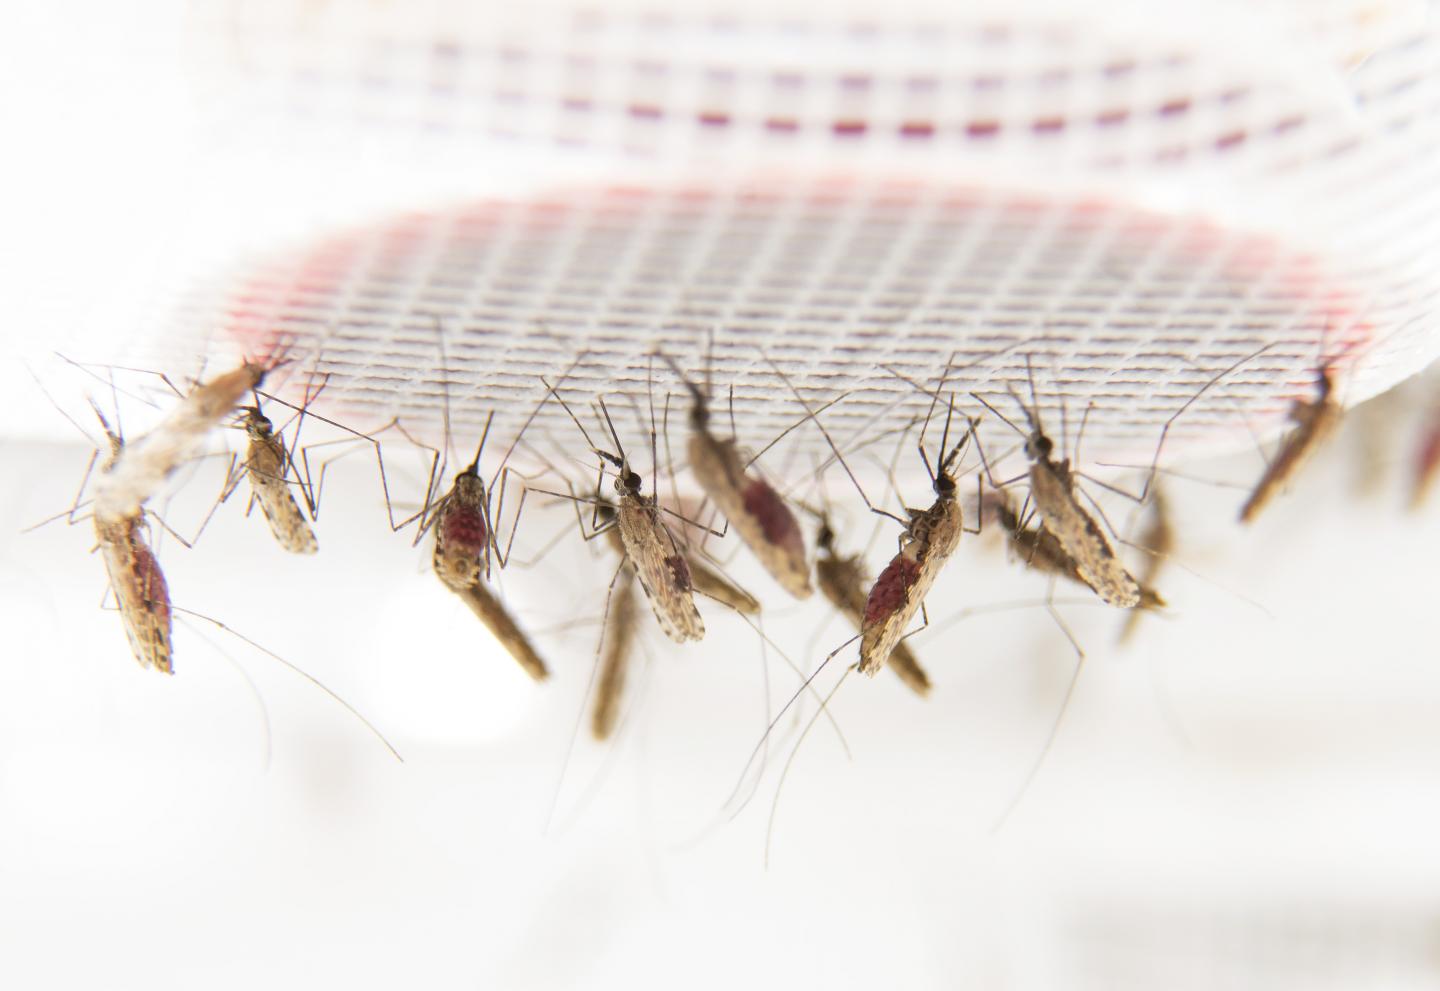 Researchers discover why malaria mosquitoes prefer to feed—and feed more—on blood from people infected with malaria. [Anna-Karin Landin/Stockholm University]